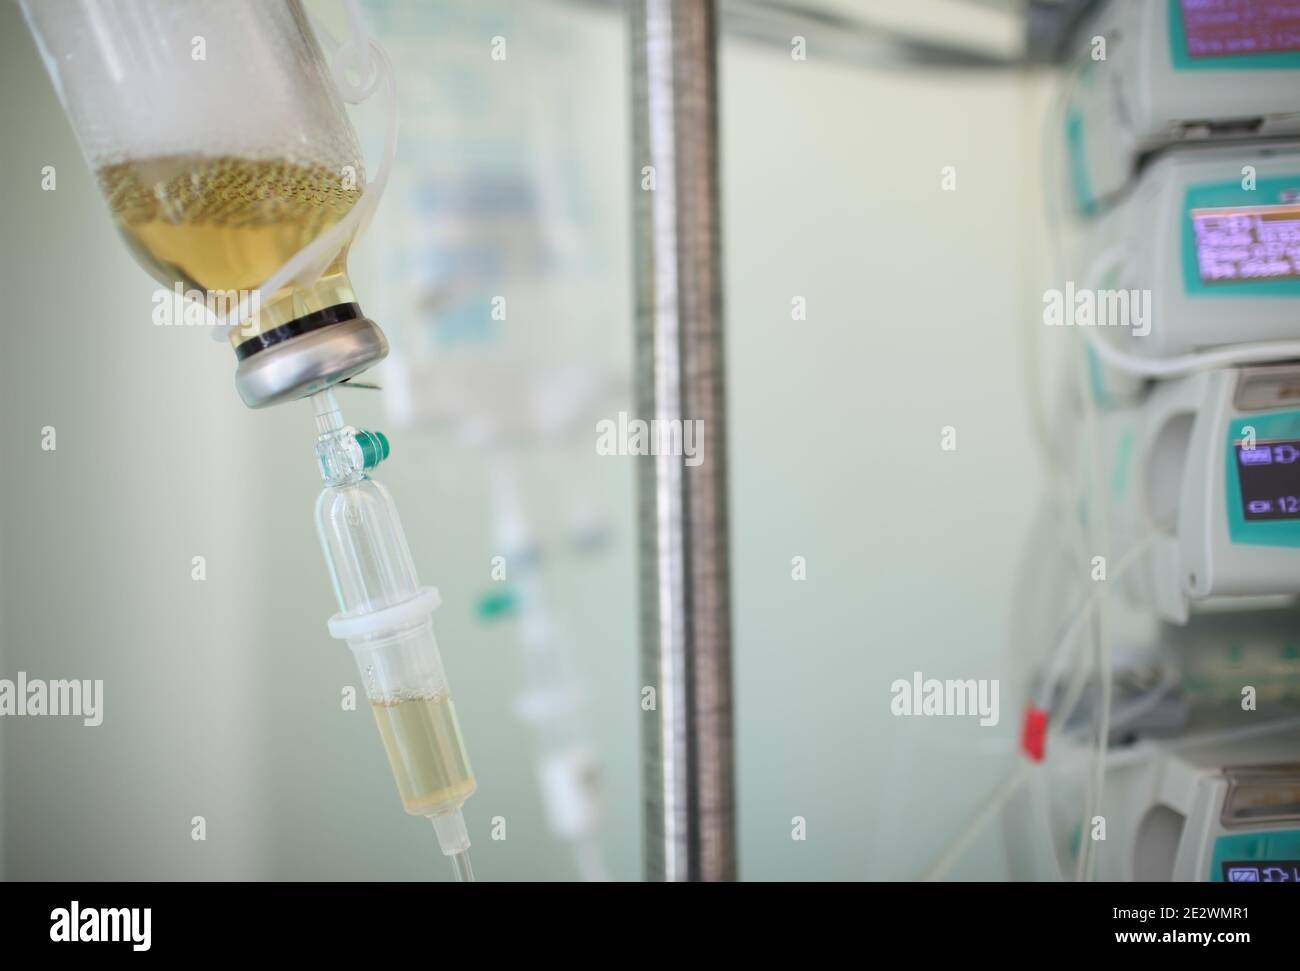 Medical solution bottle hanging on the rack. Stock Photo